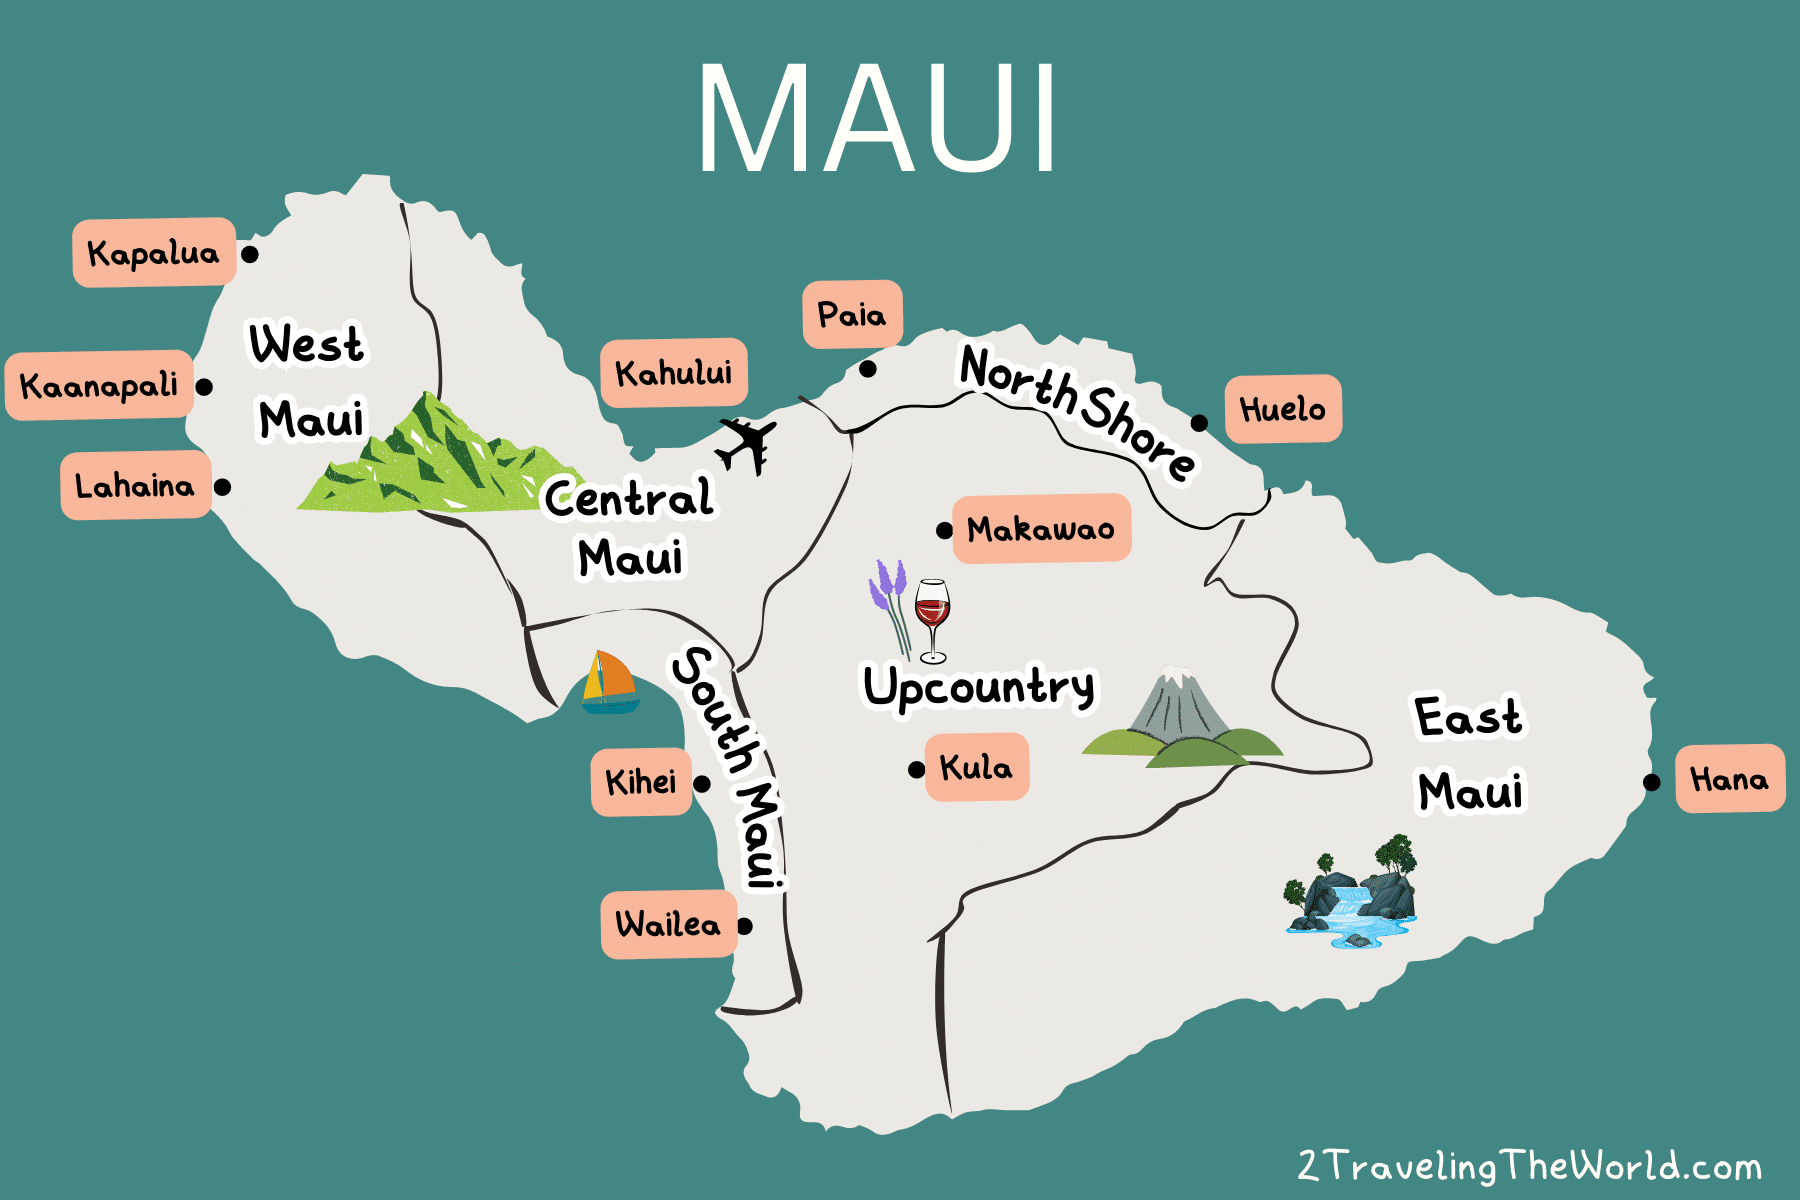 map of maui showing south maui, west maui, east maui, upcountry, north and central maui outlined on a map